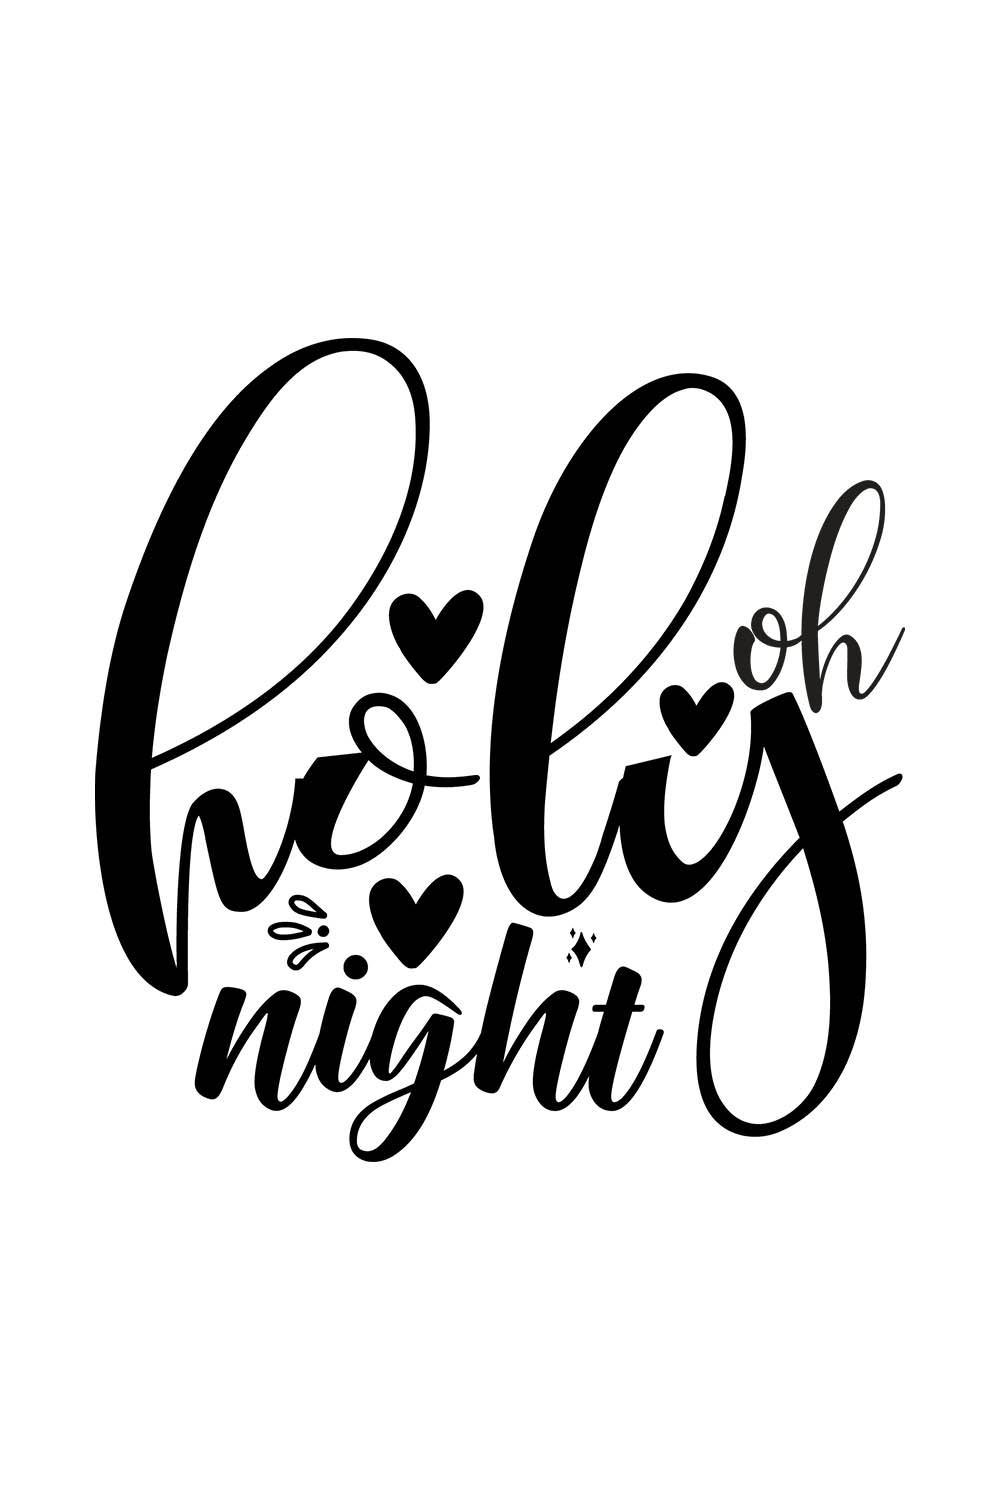 Image with amazing black lettering for Oh Holy Night prints.